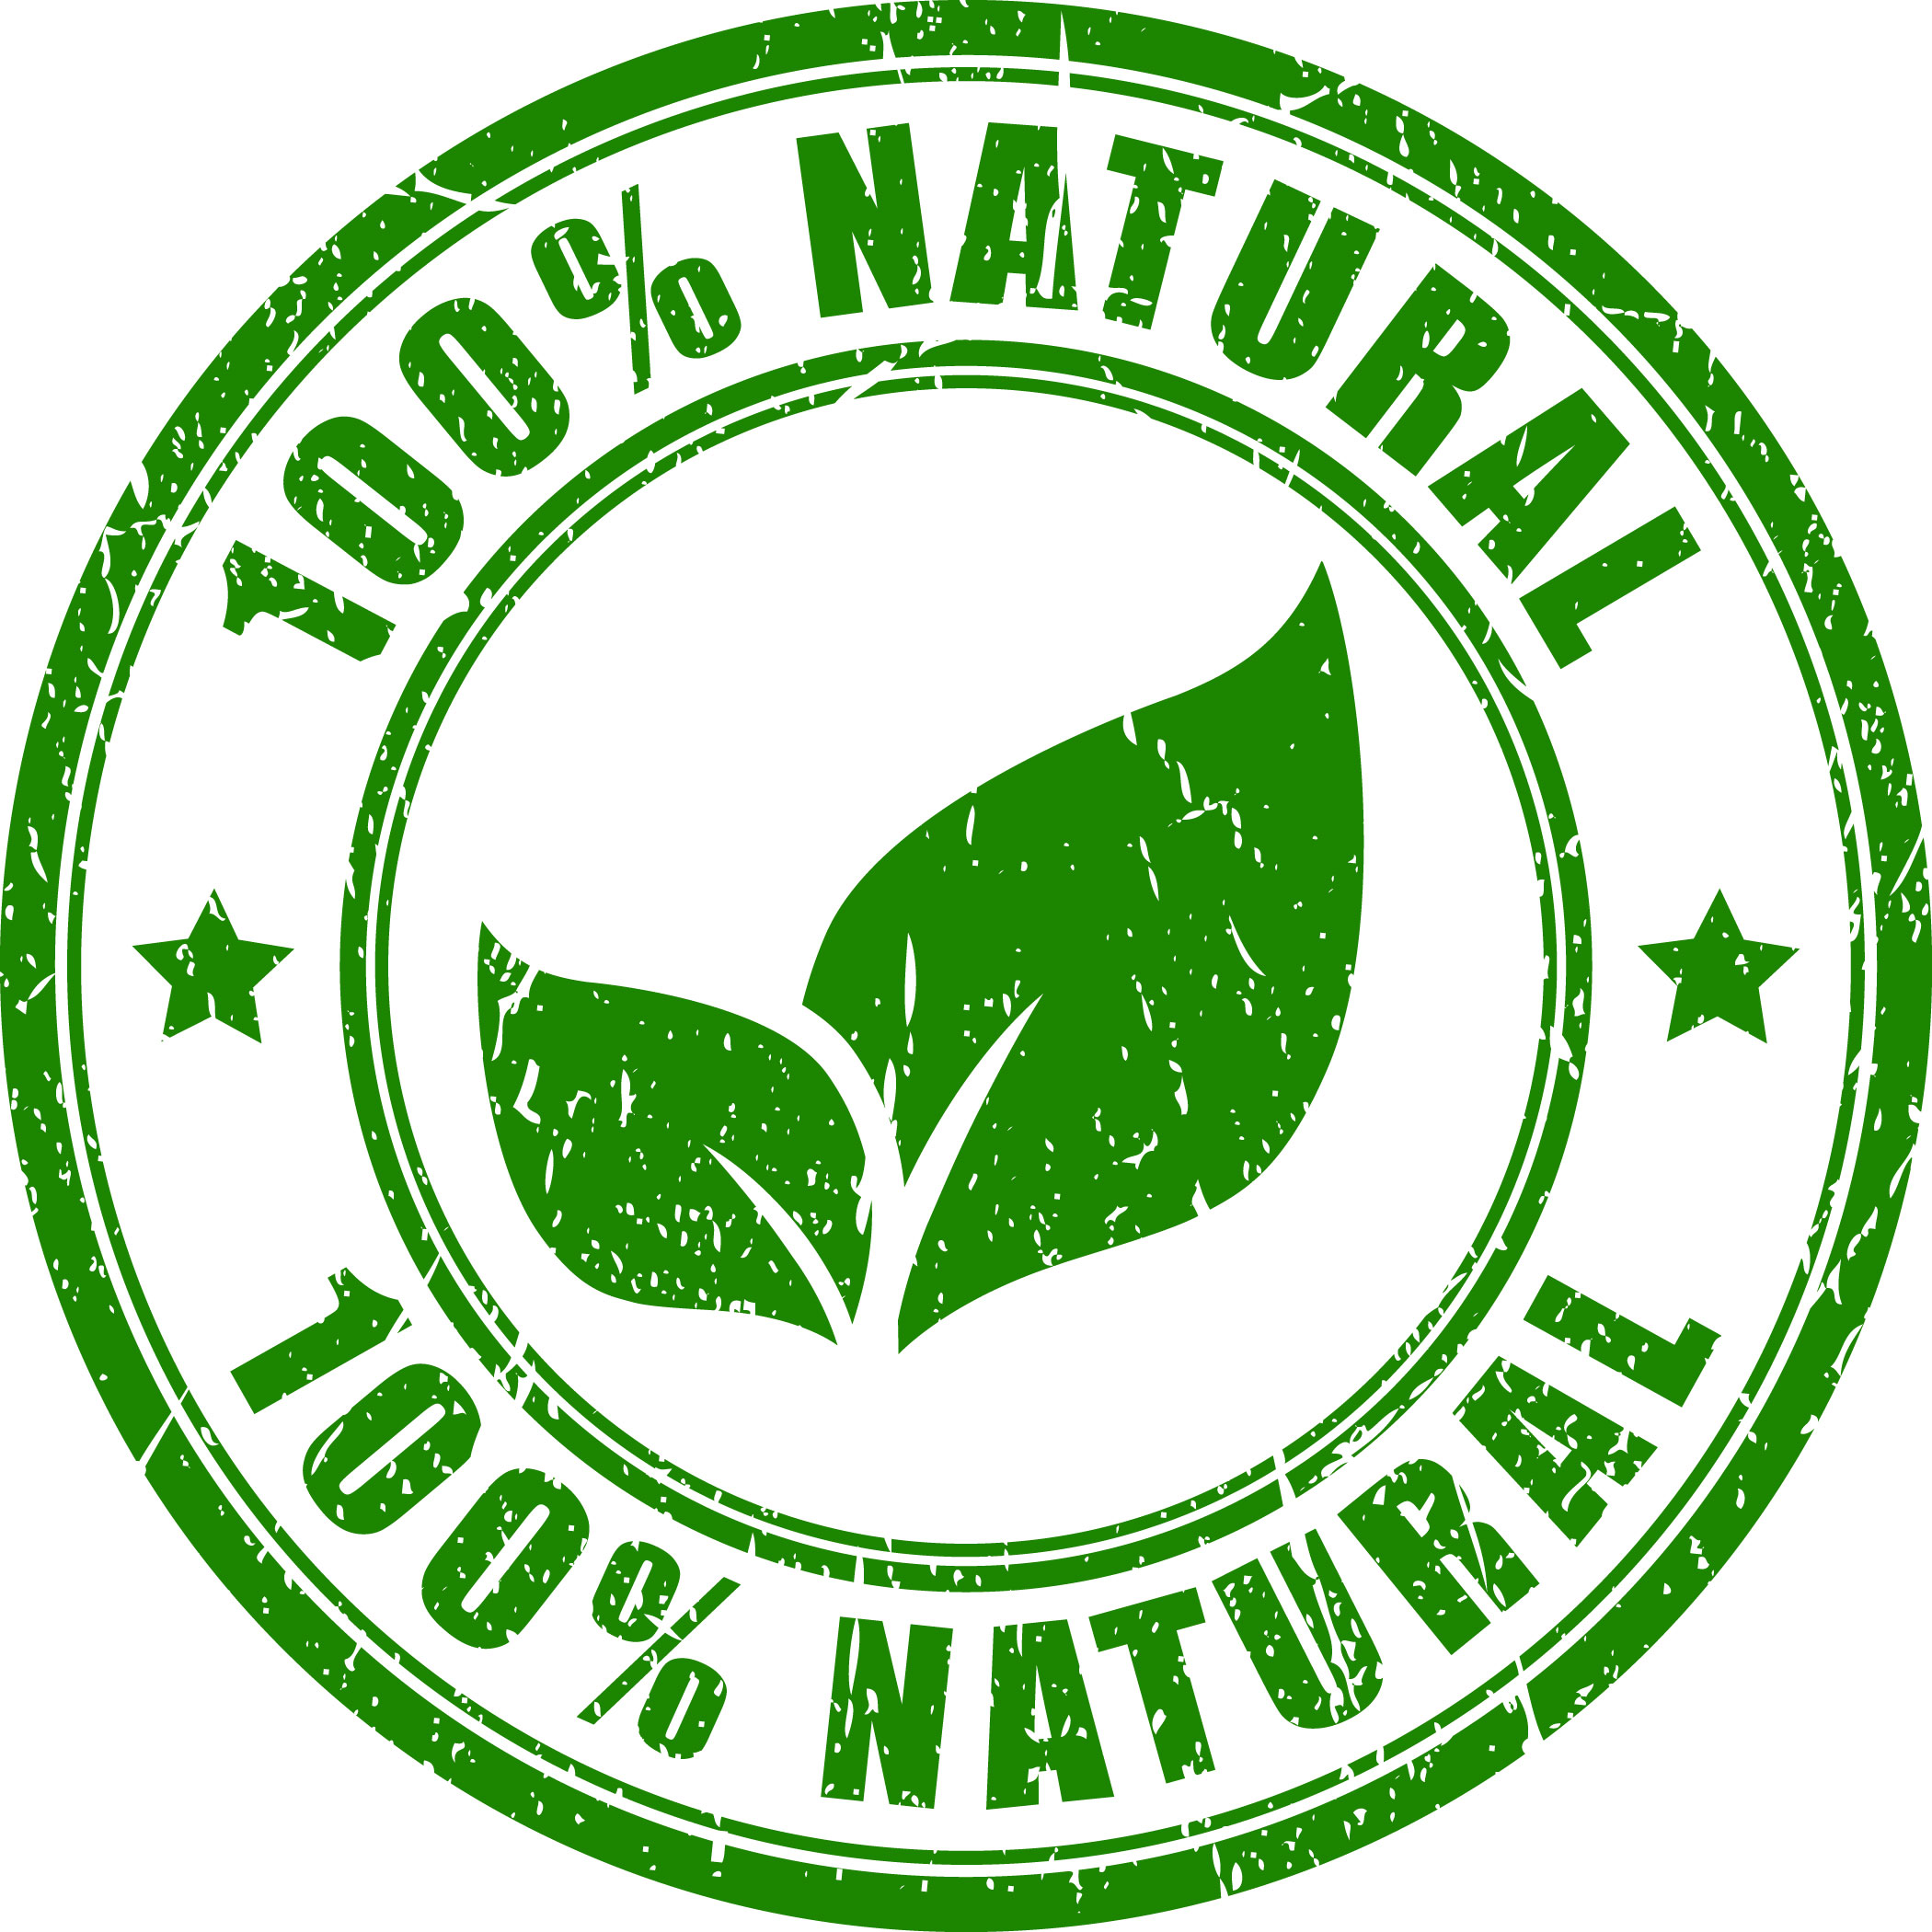 100% all natural ingredients